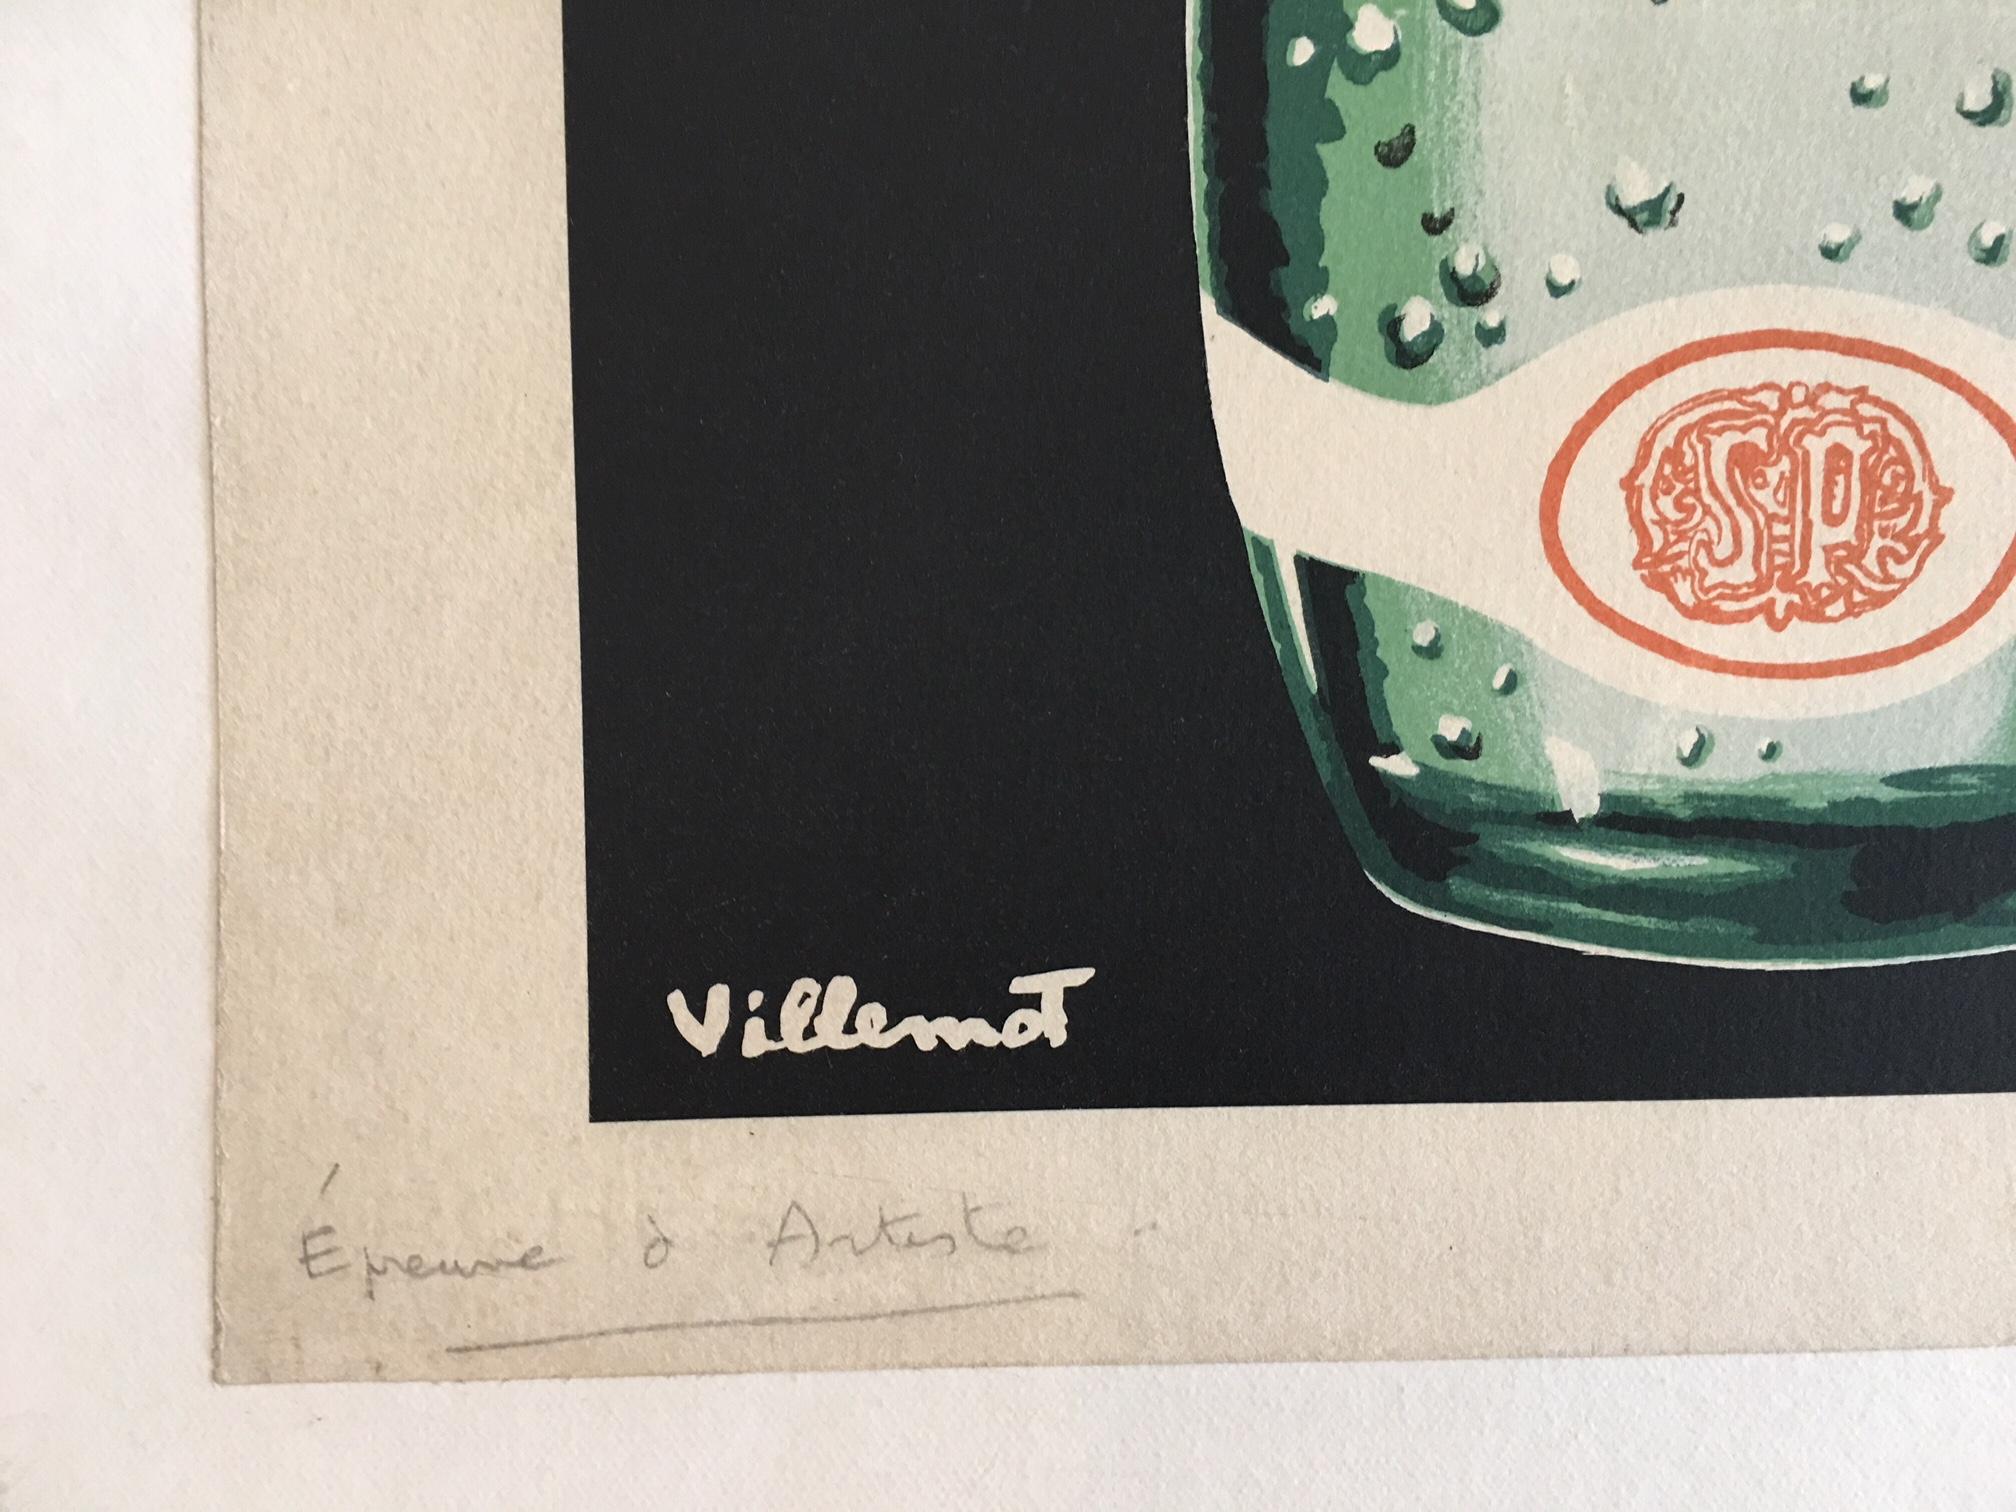 A beautiful and rare poster by Villemot for Perrier and a prime example of the artist’s elegant signature style. This poster is signed and dated in pencil by the artist Villemot. 

Artist: 
Villemot

Year 
1982

Dimensions: 
62 x 48